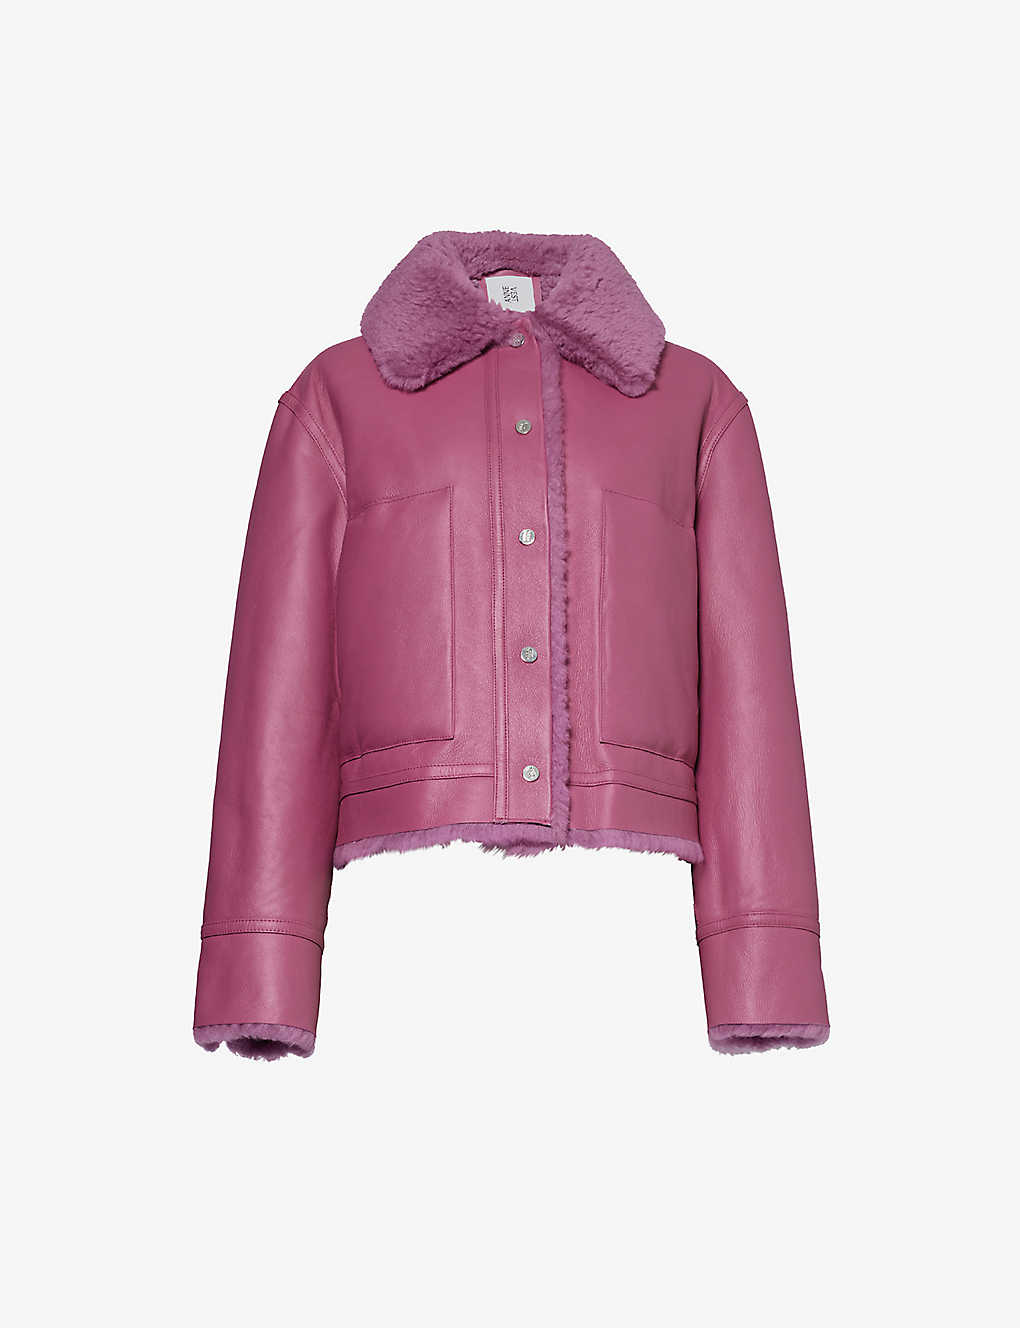 Anne Vest Beth Leather Jacket With Shearling Lining In Pink